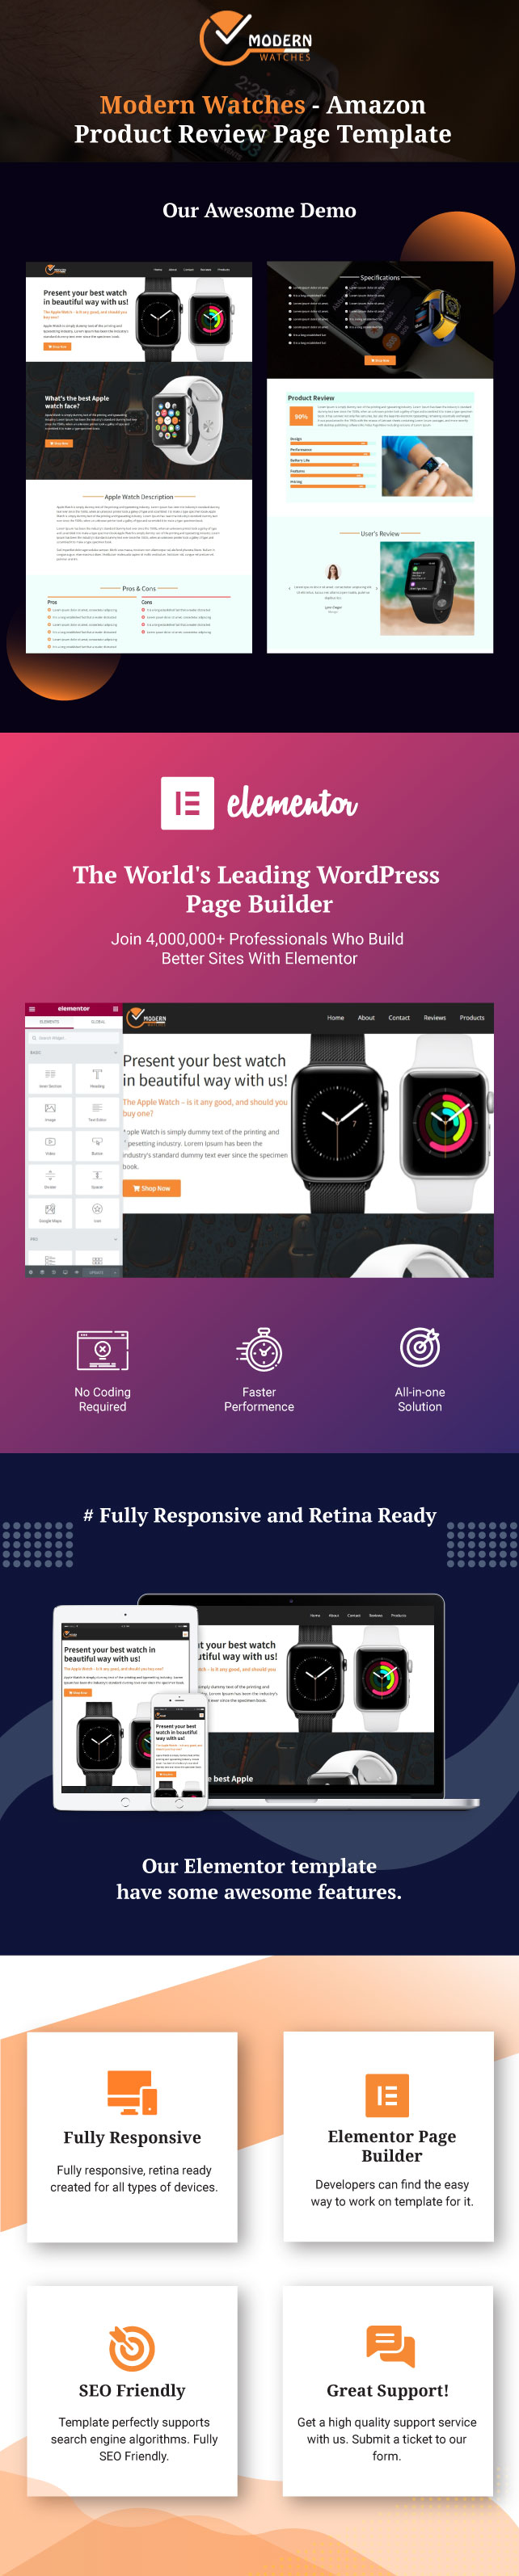 modern-watches-amazon-elementor-product-review-page-template